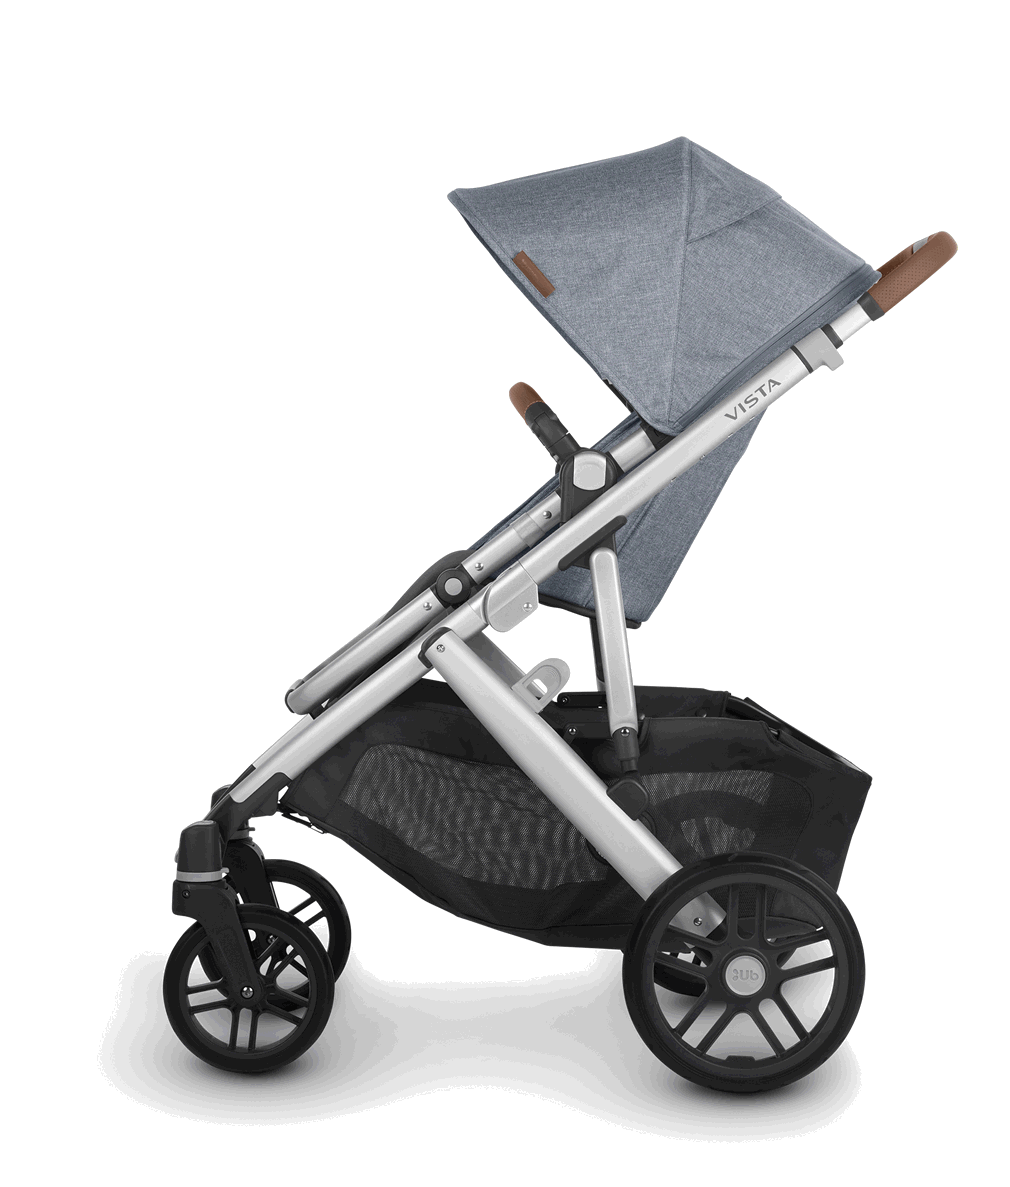 View Mega babies' UPPAbaby Vista V2 double stroller configurations.